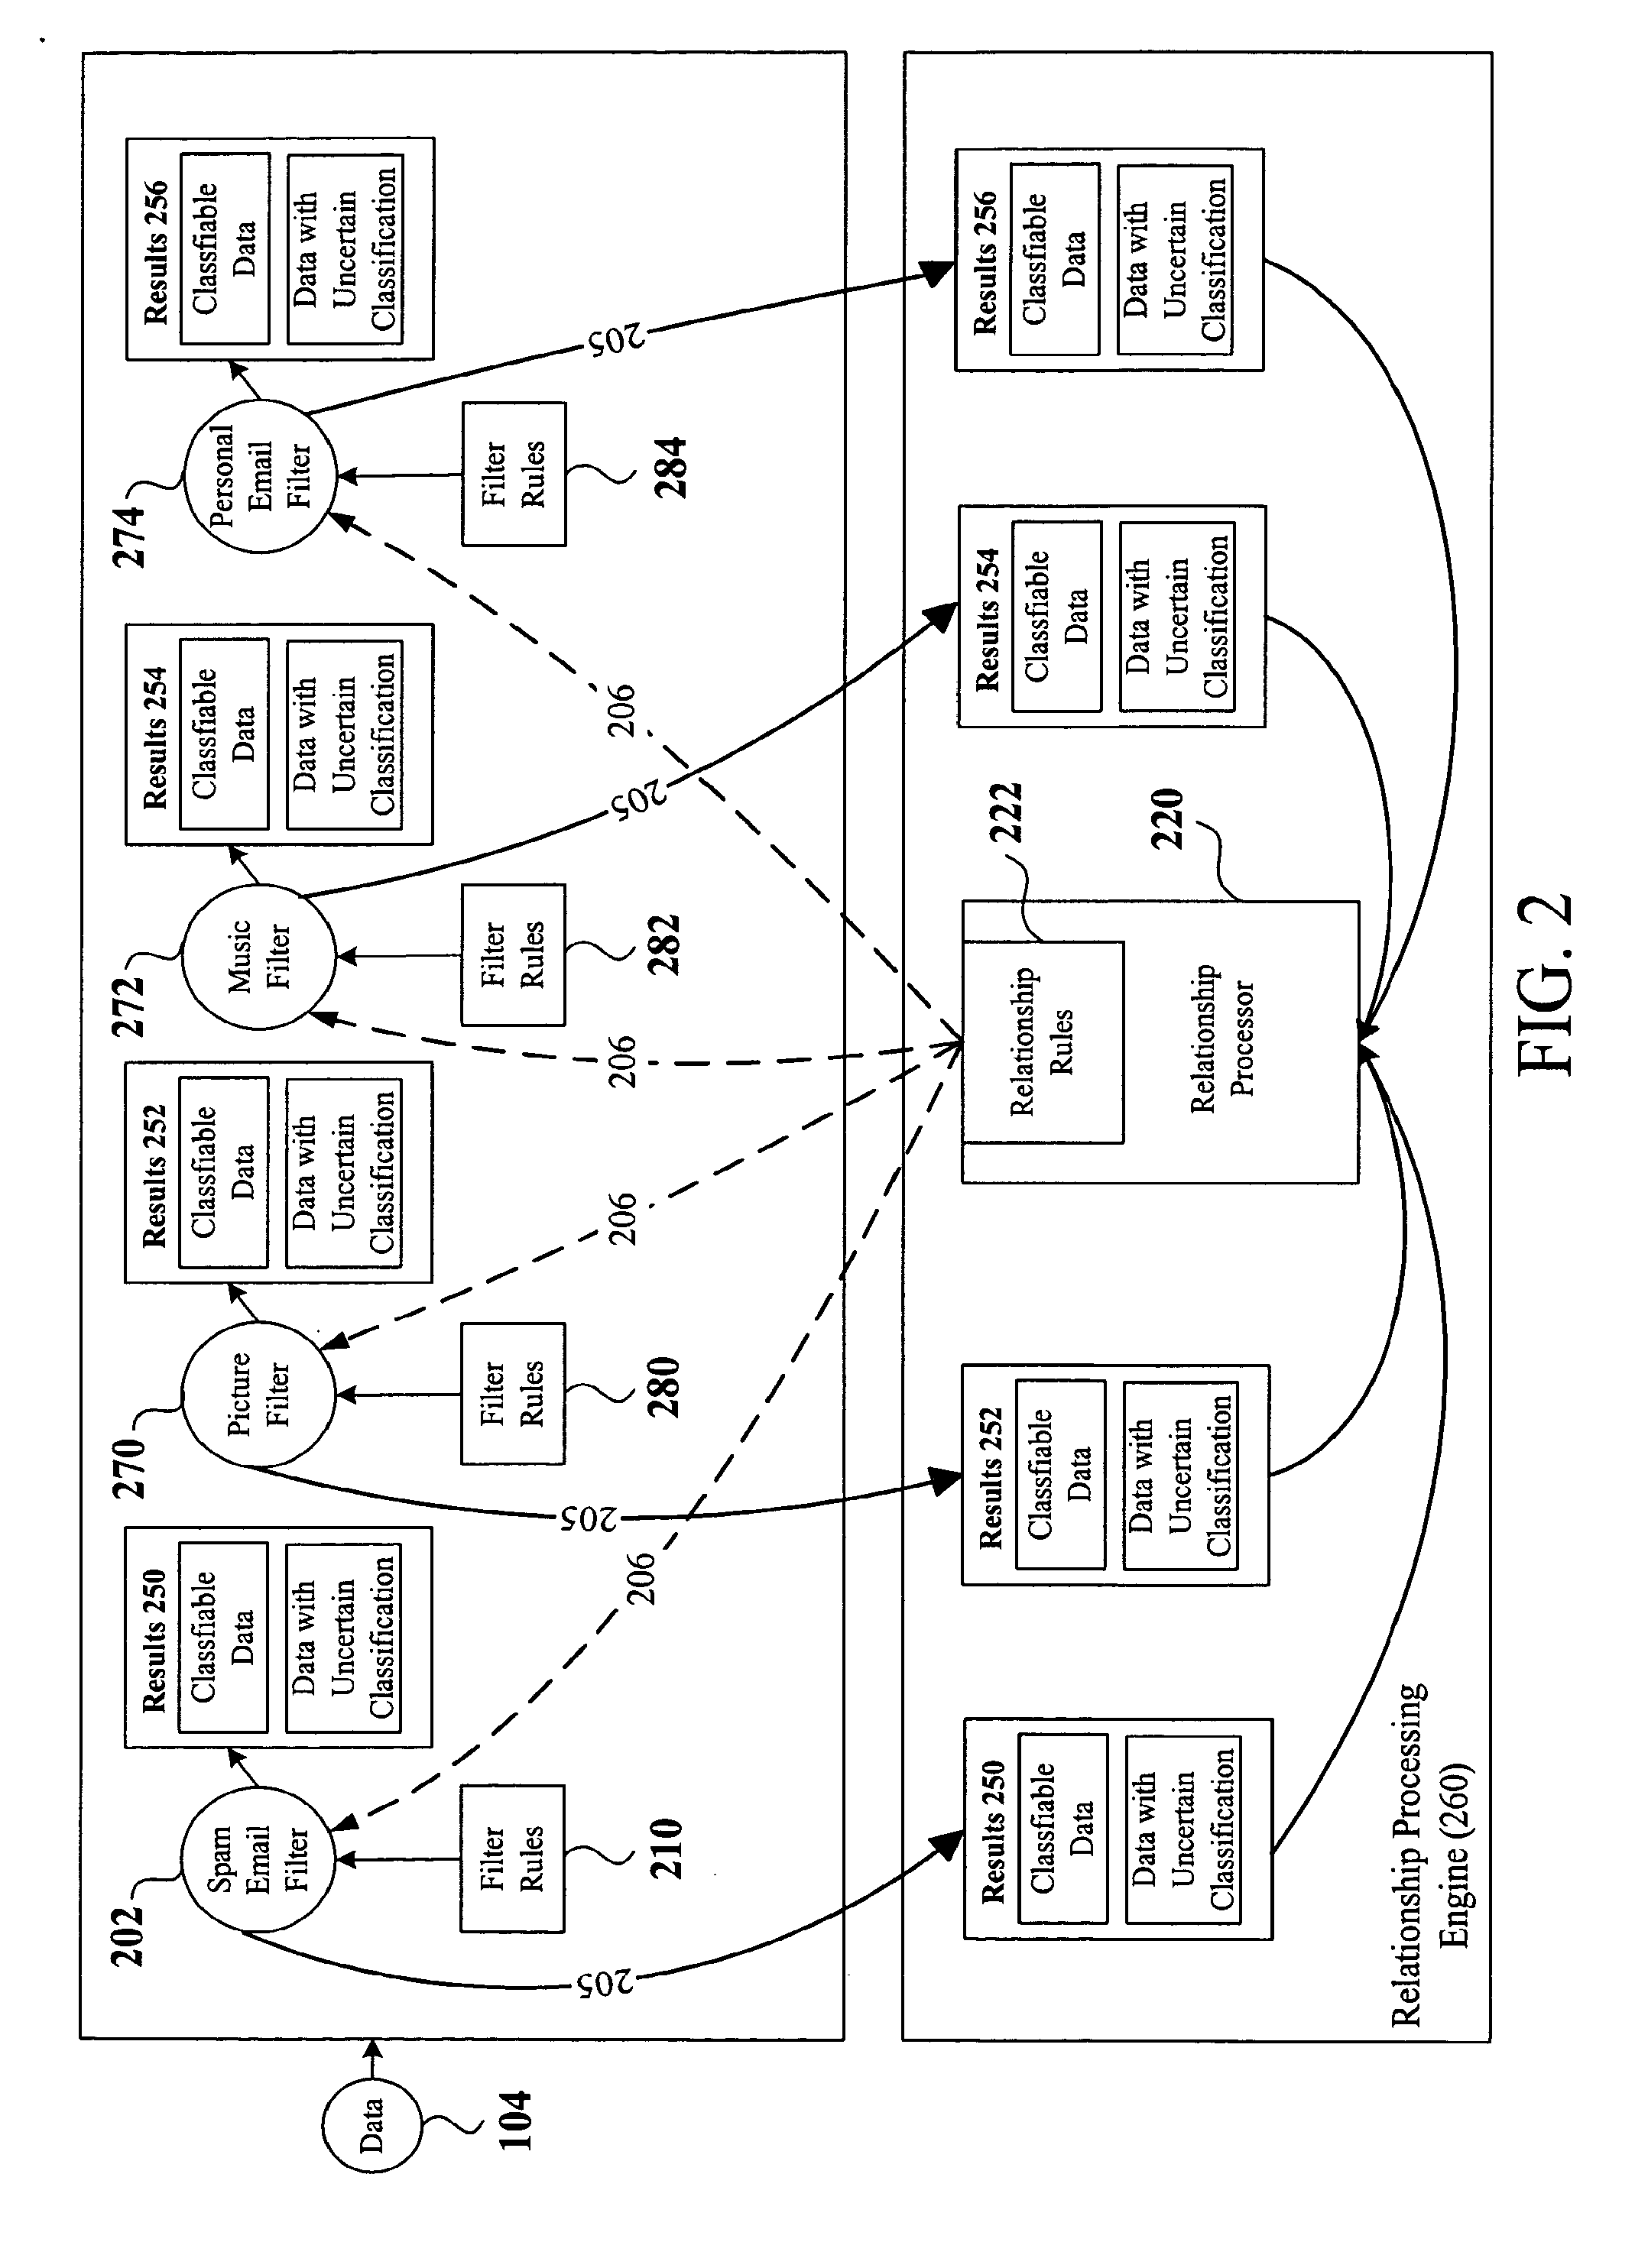 Methods and systems for training content filters and resolving uncertainty in content filtering operations